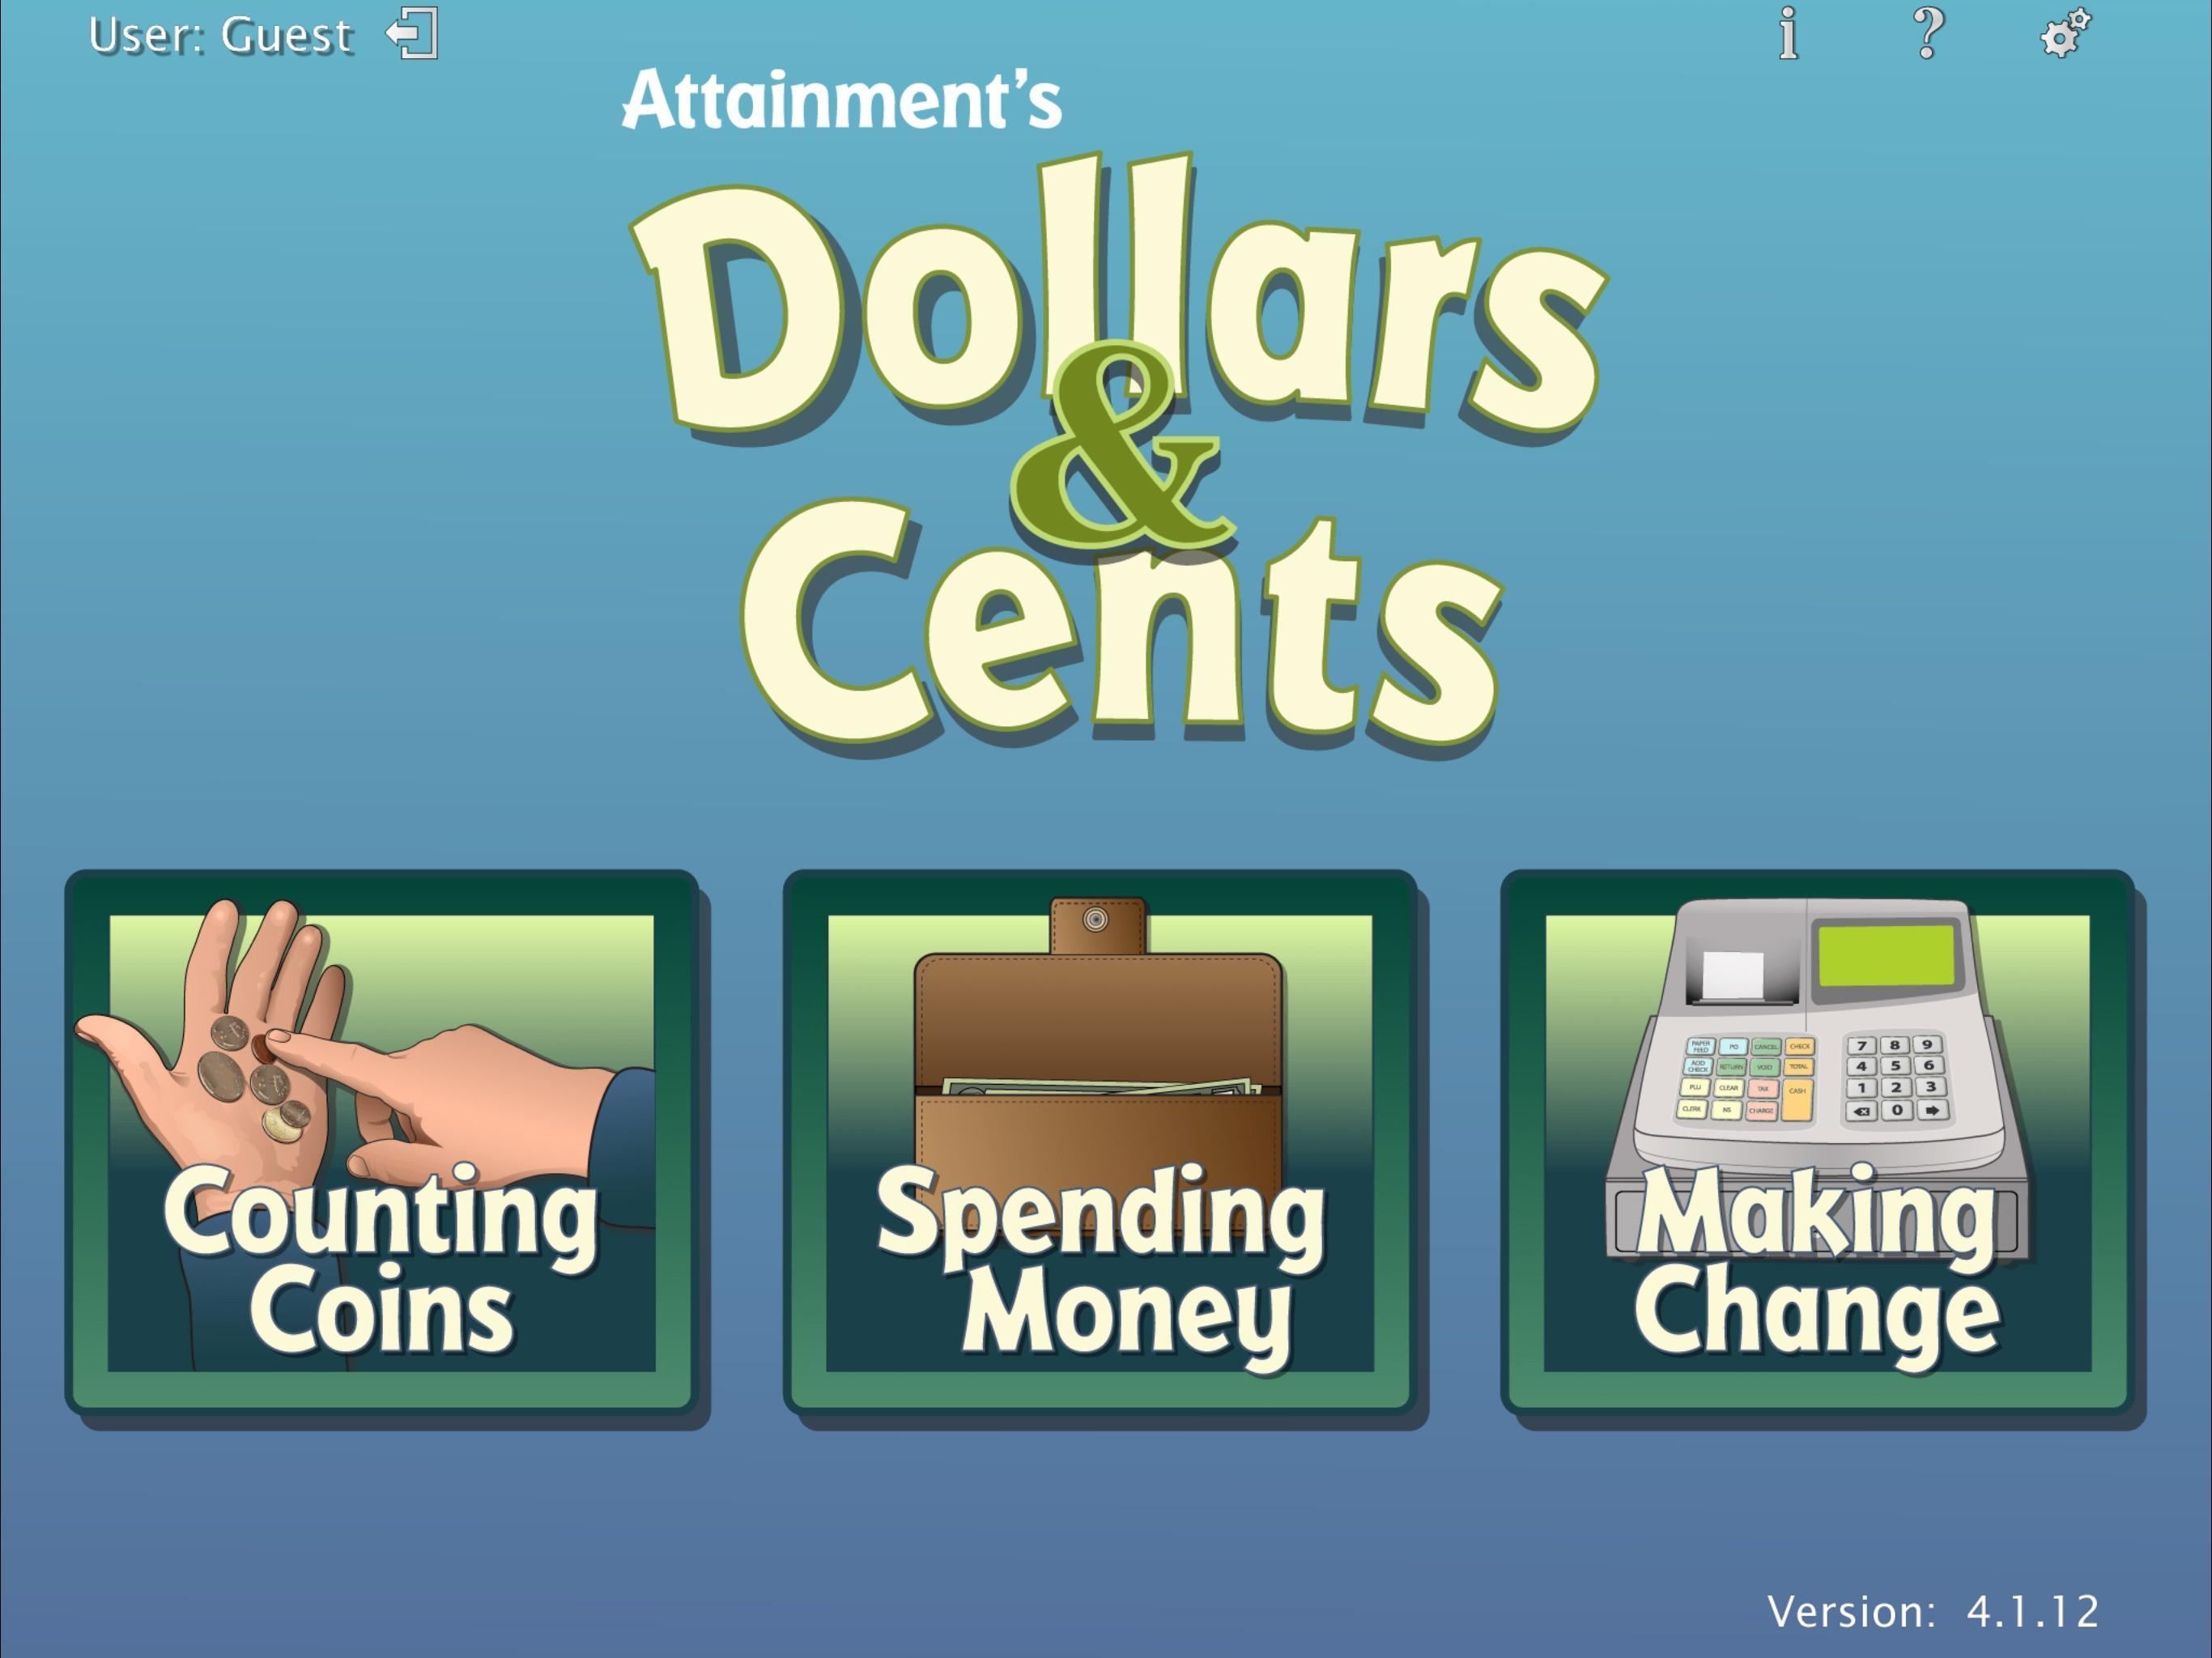 Spend Bill Gates money игра. Dollars and Cents Dictionary. Dollar Plays. Subscriber Boost.